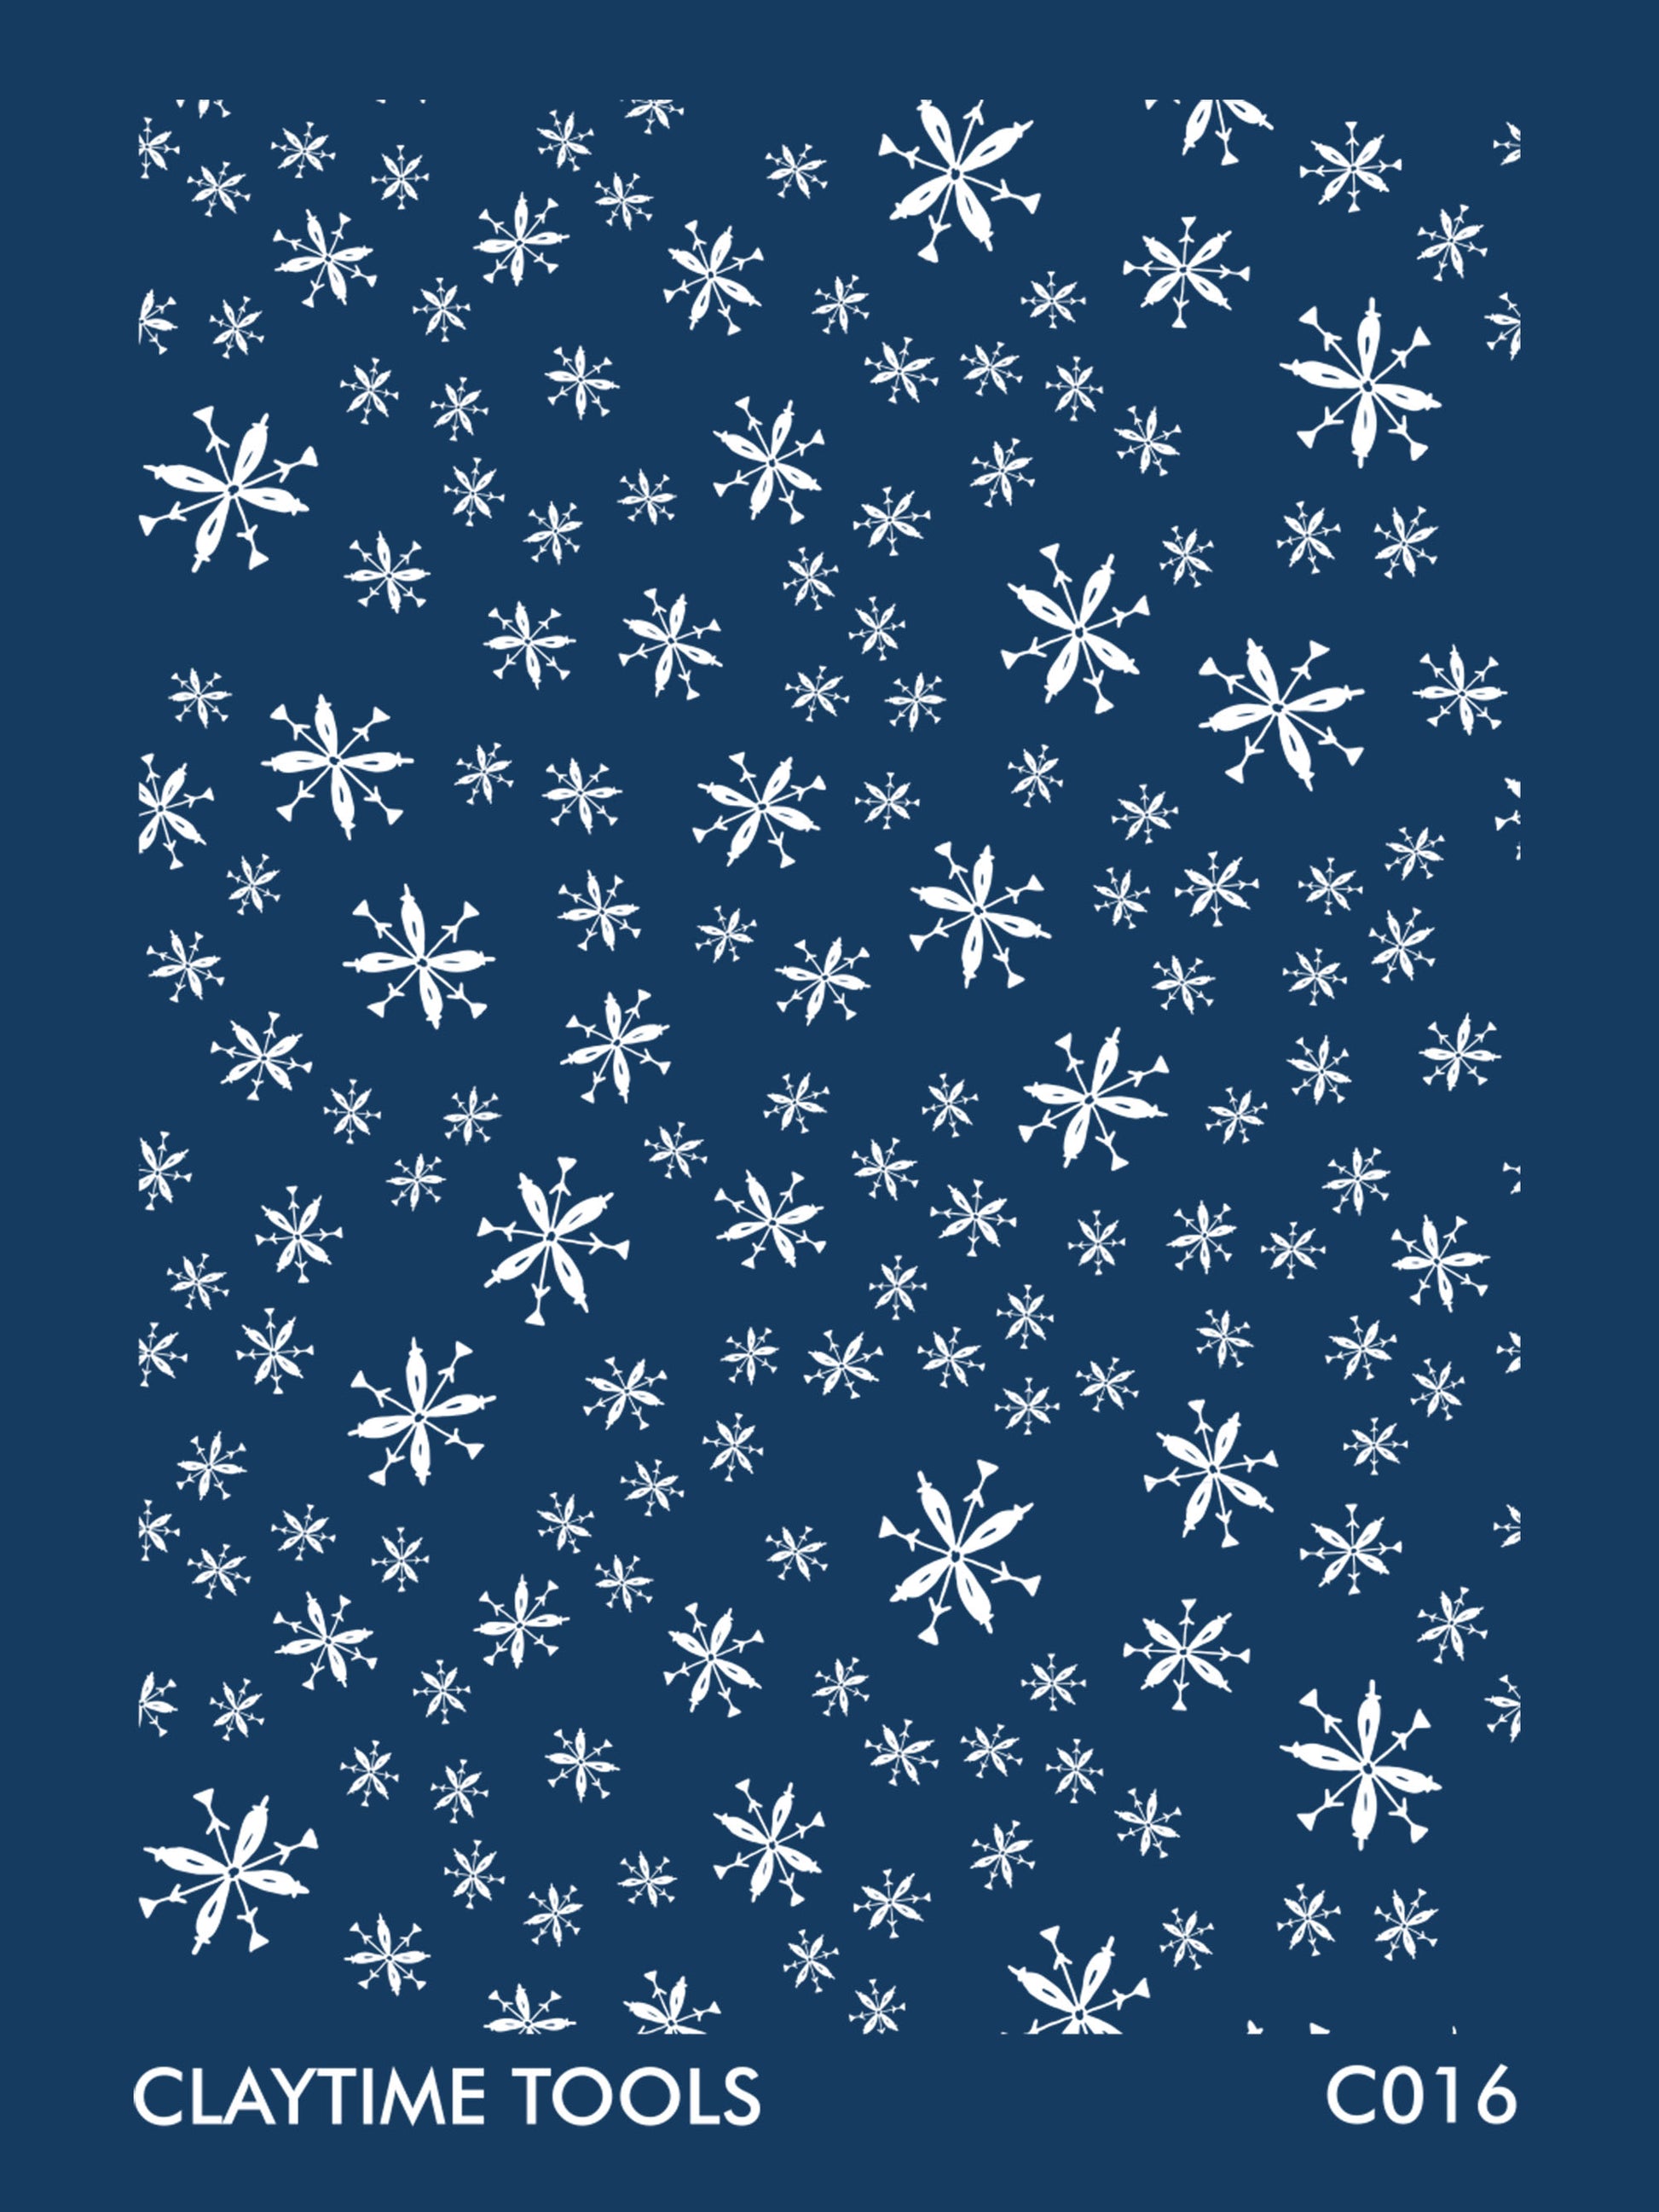 Image of a silkscreen print featuring snowflake shapes.